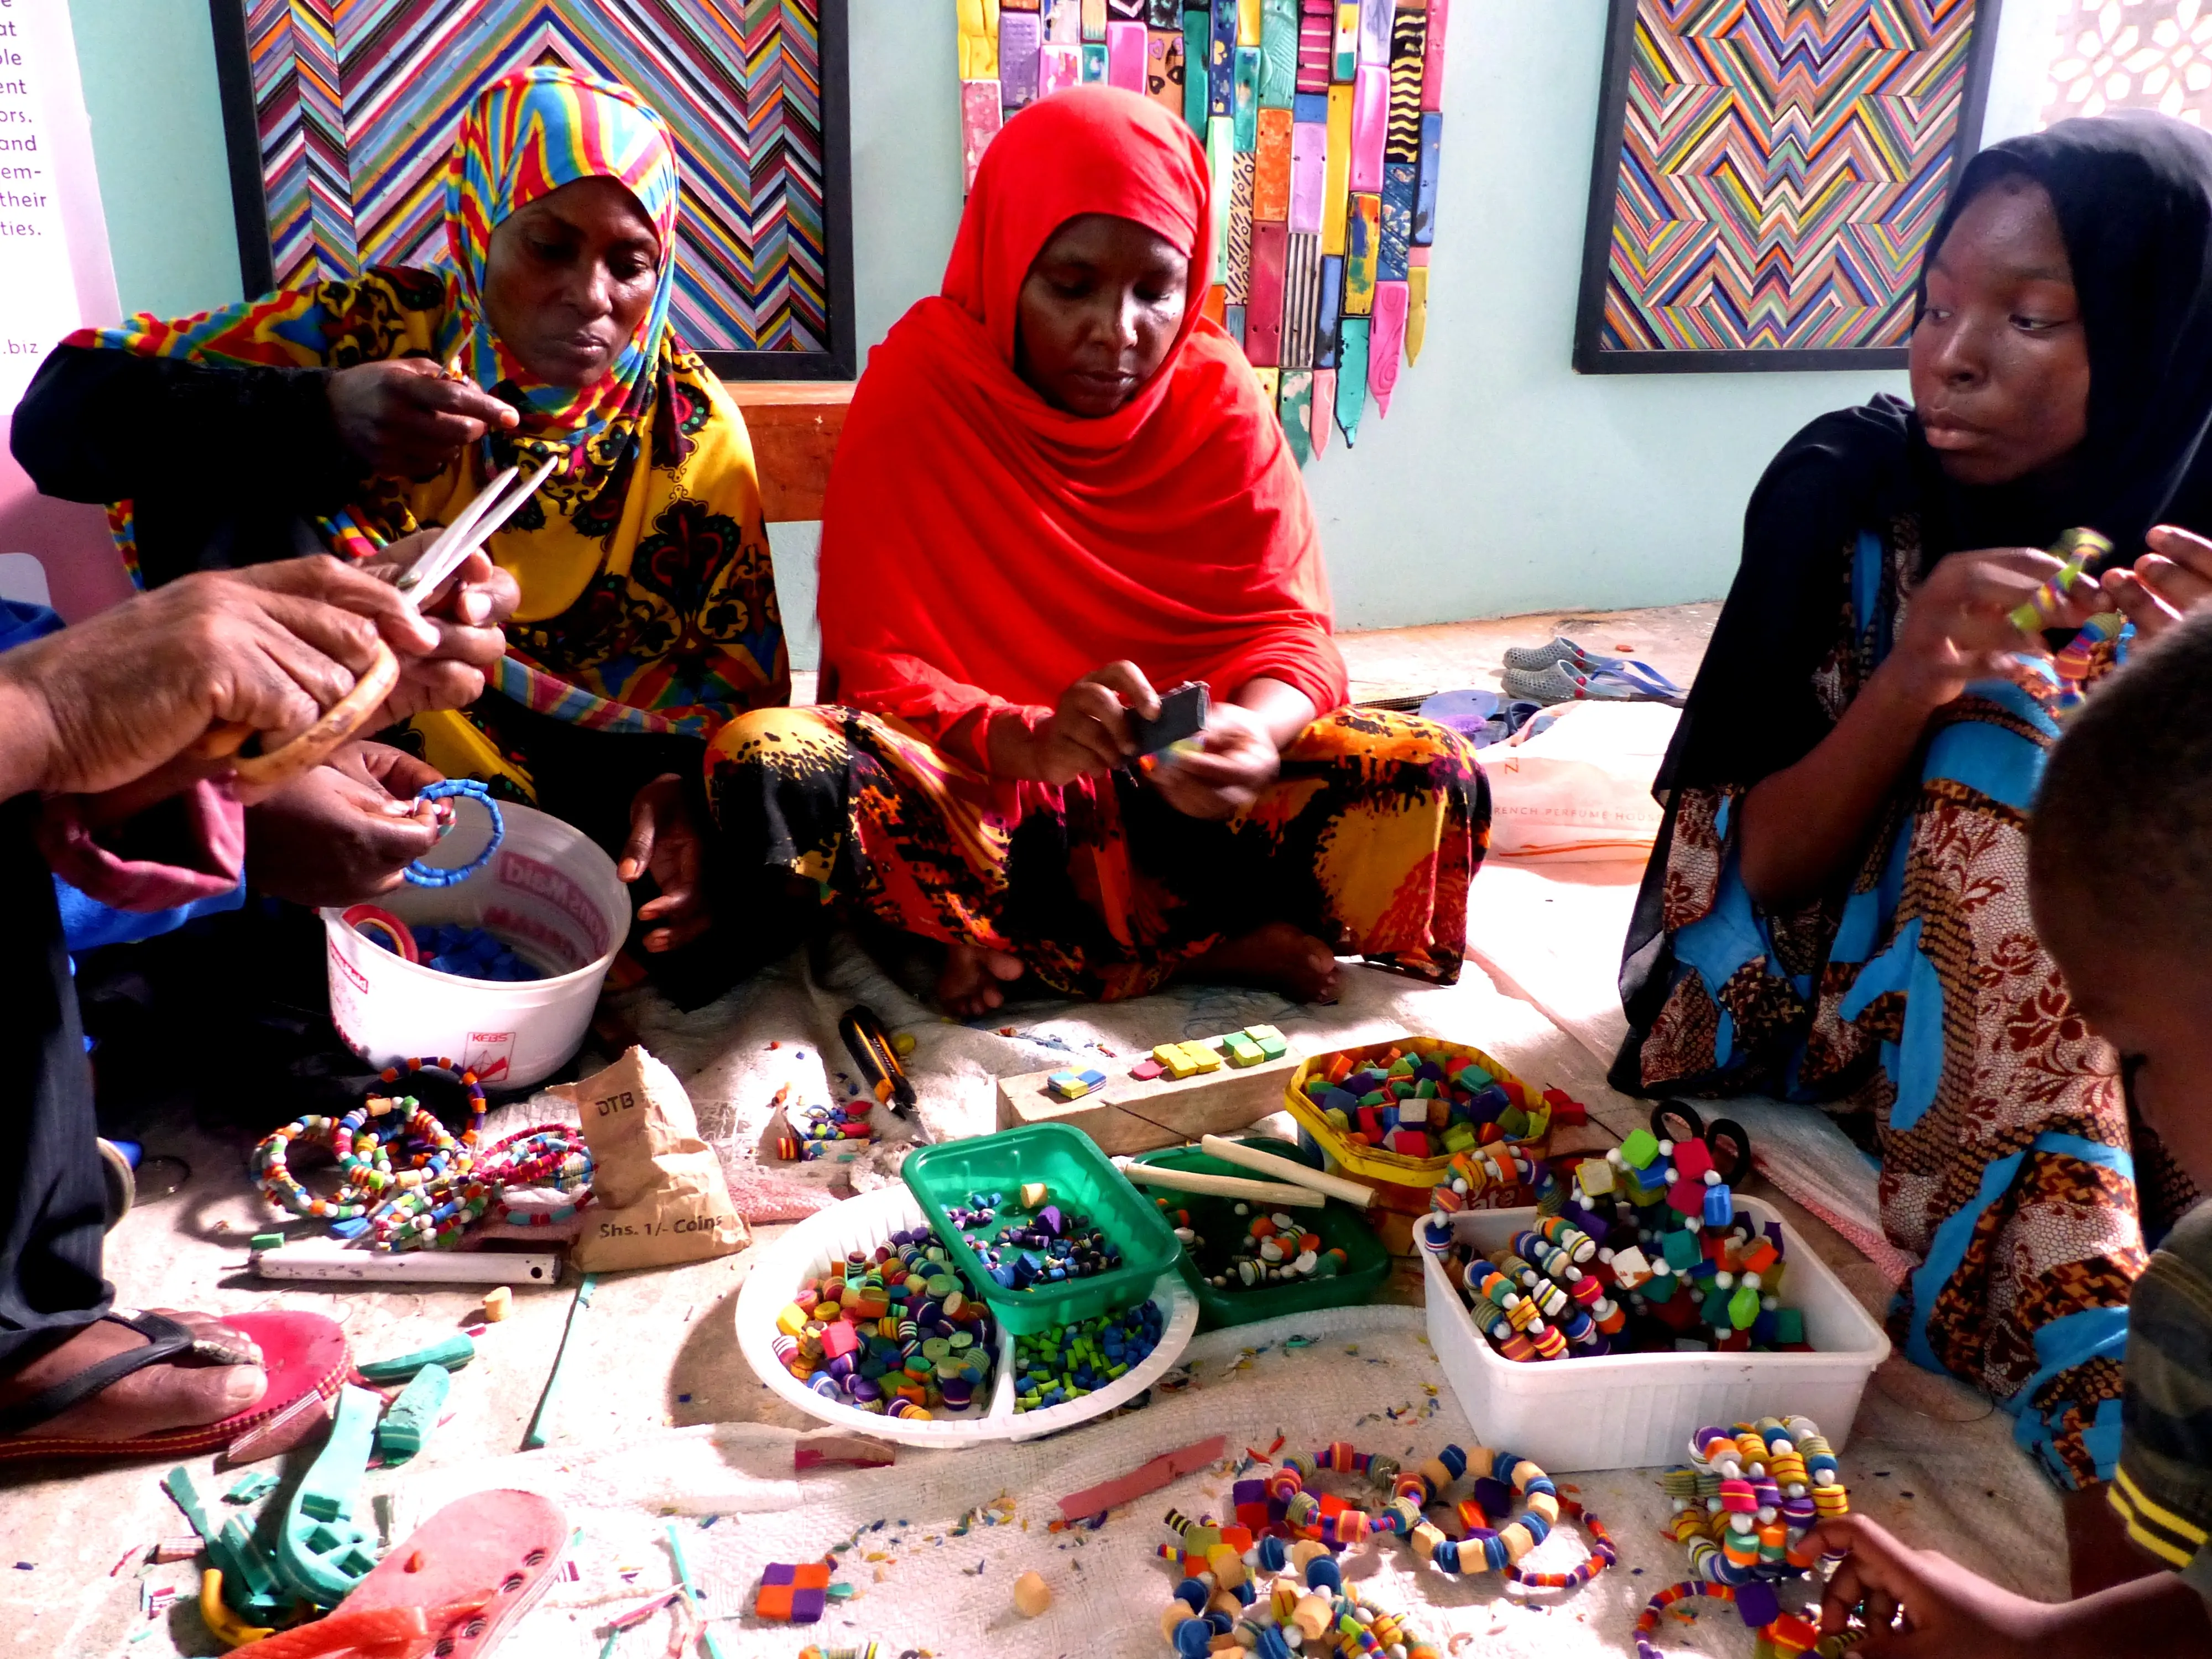 Women making jewelry from recycled flip flops